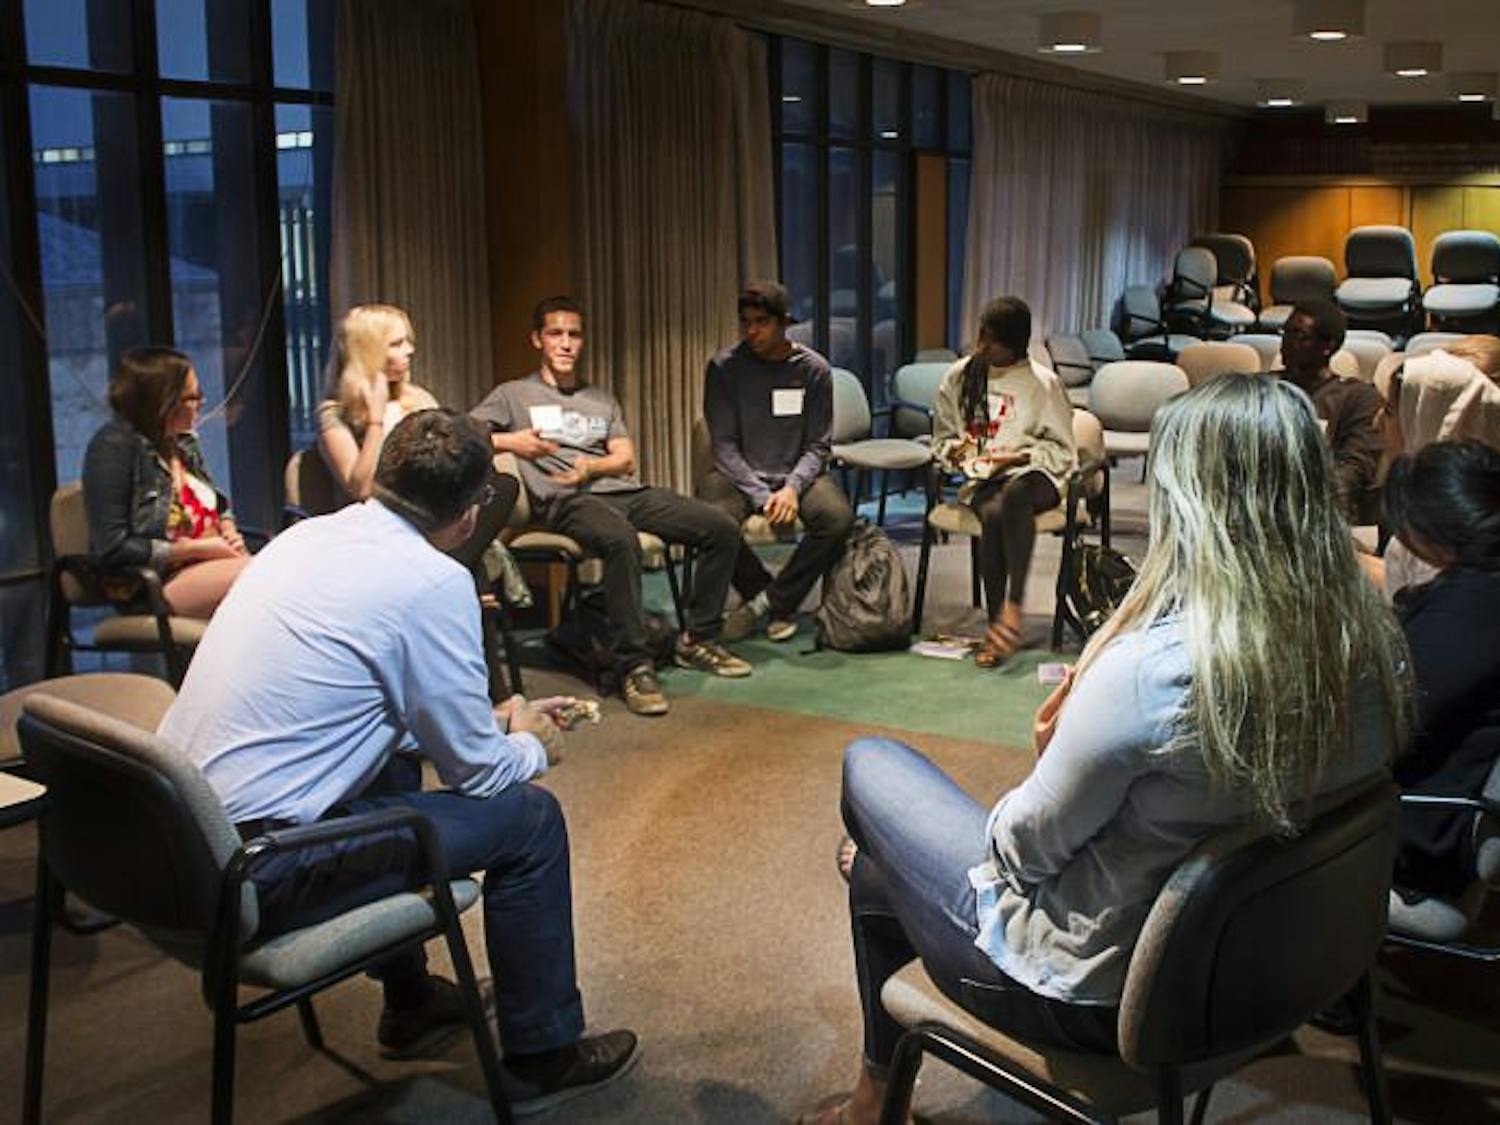 The Center for Religion and Global Citizenry was founded to provide a space for students to have difficult but respectful conversations about religion.